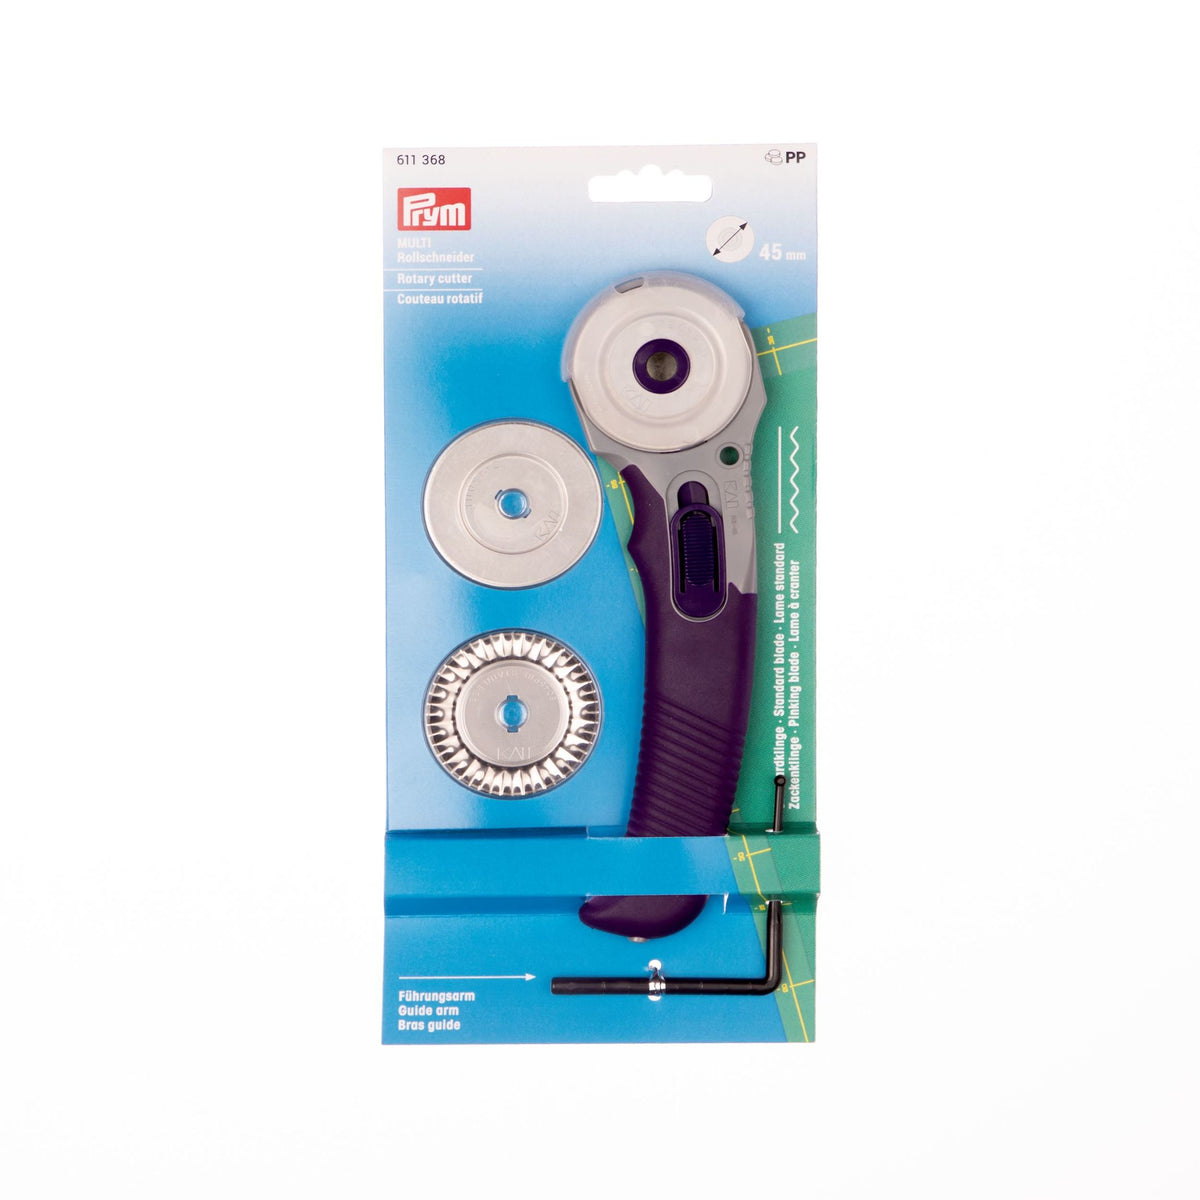 Prym Spare Blades for Rotary Cutter 45mm 